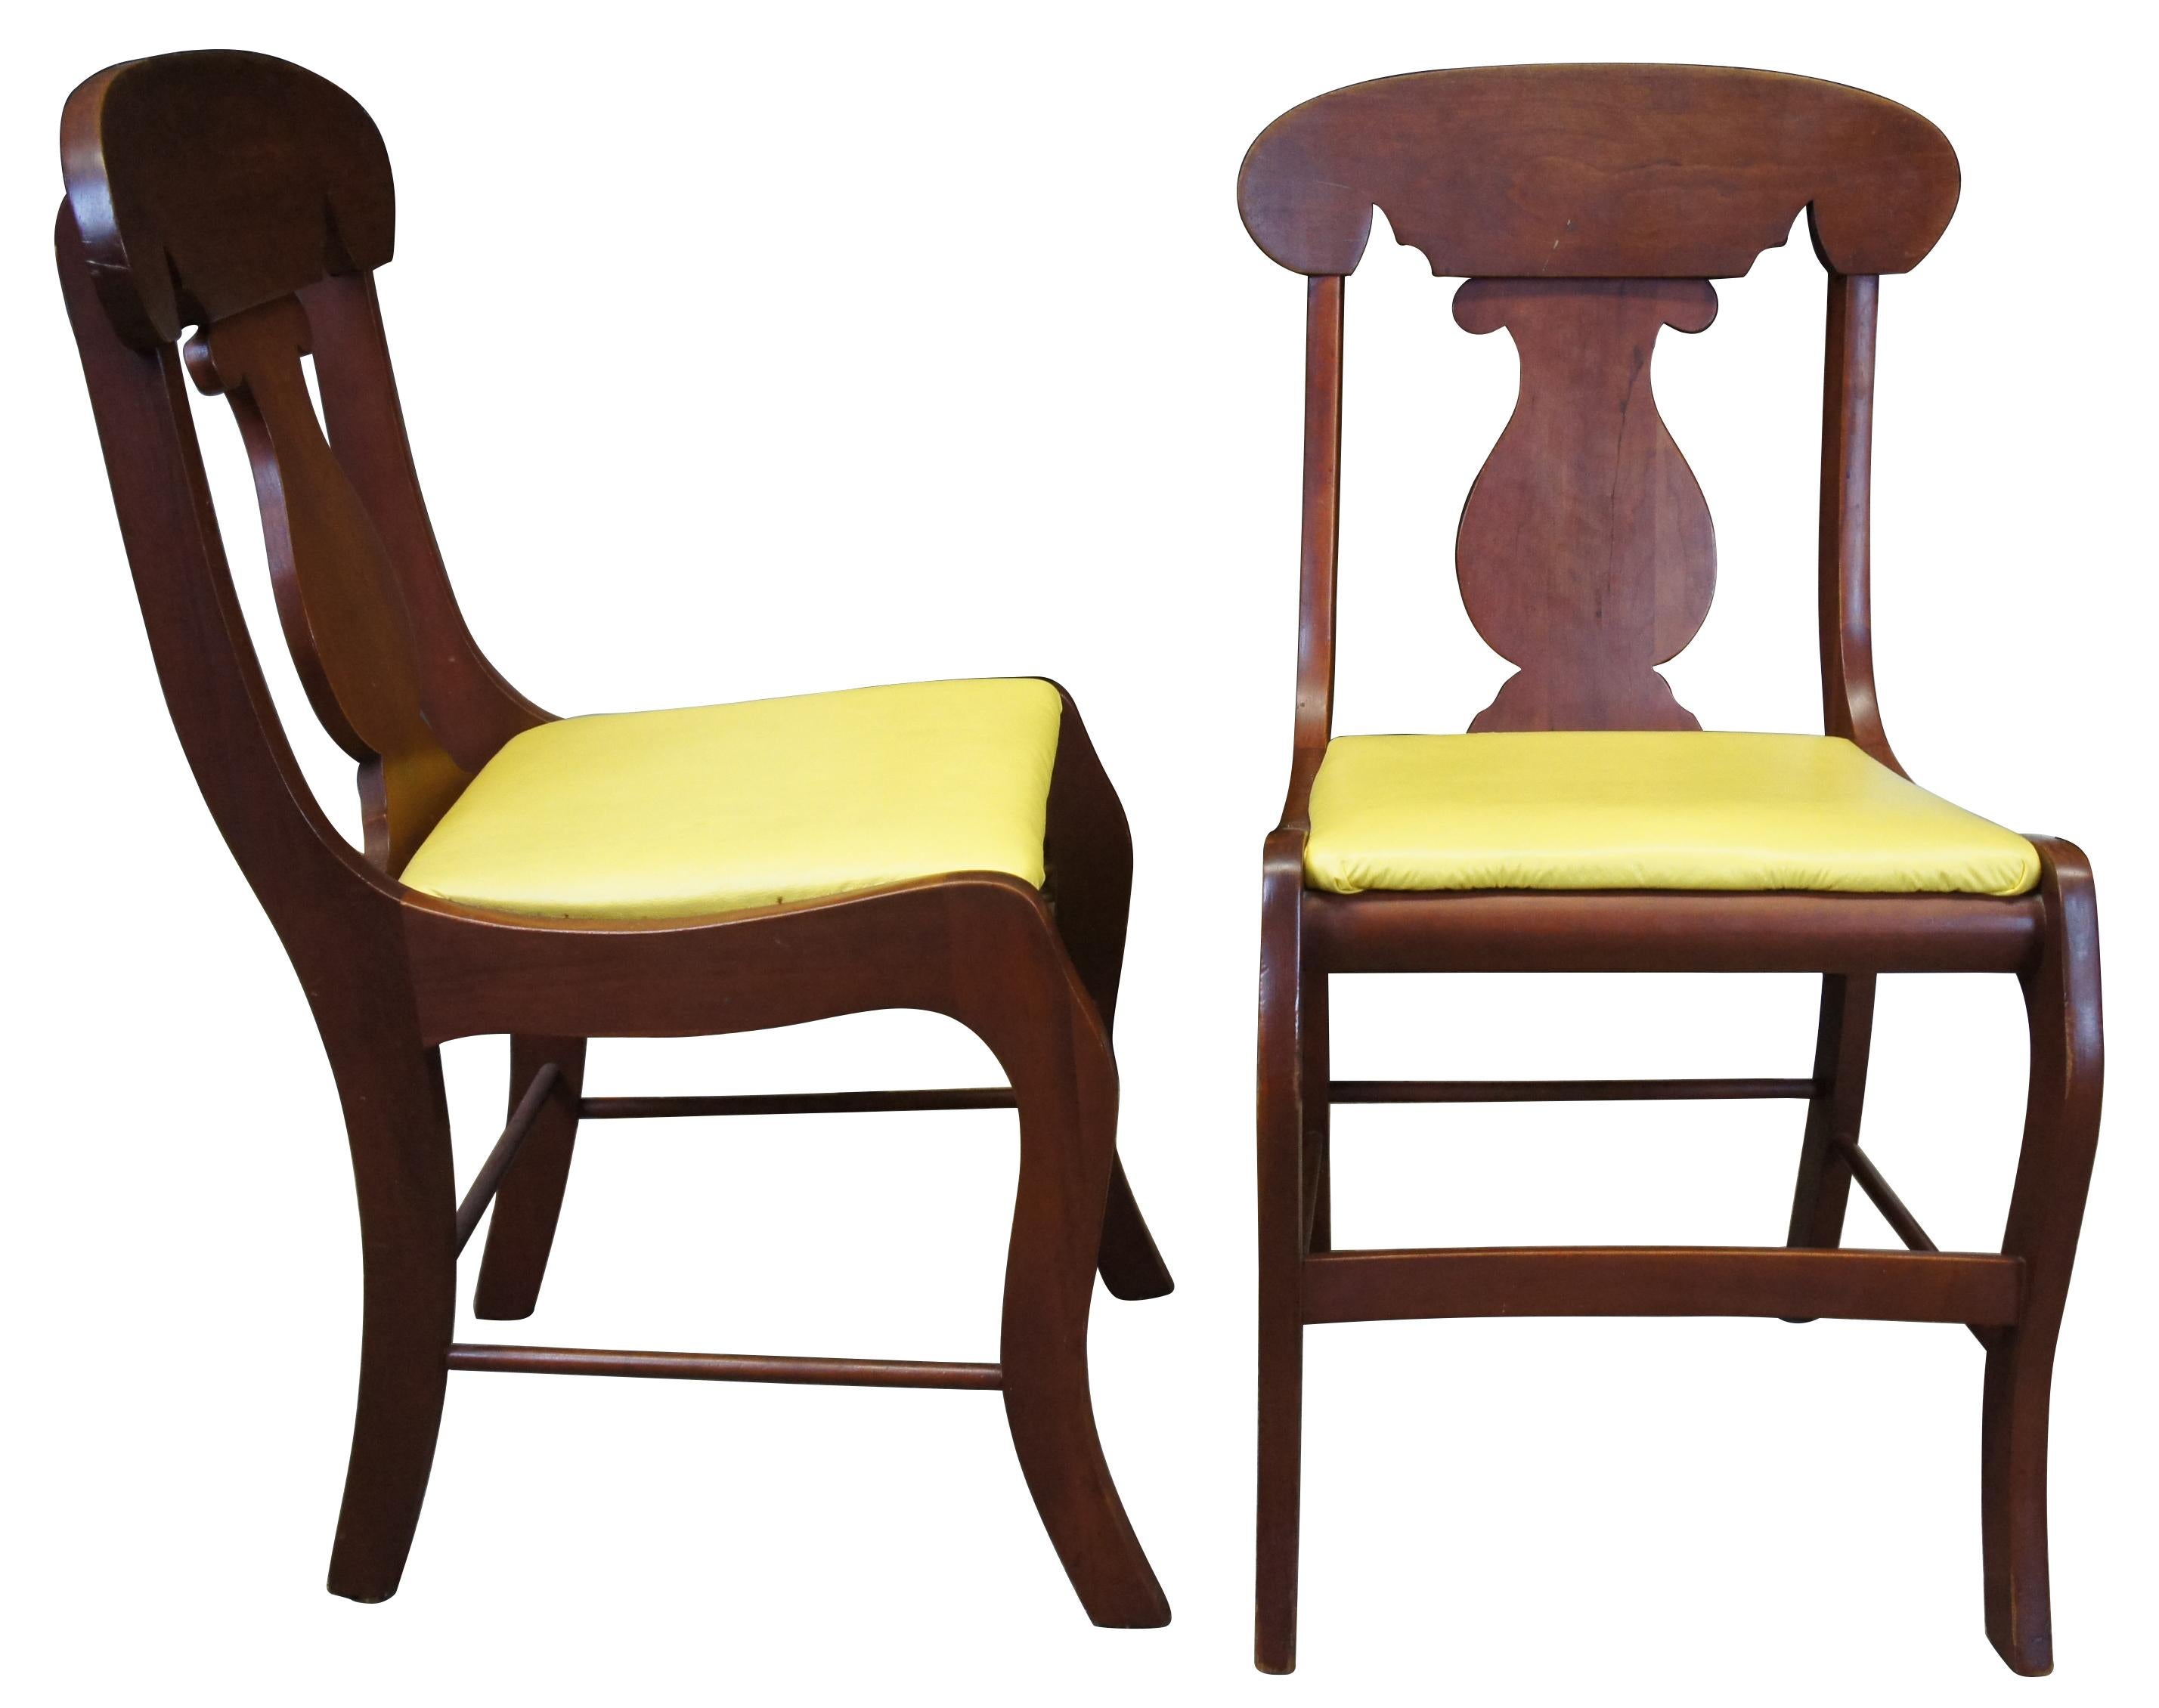 4 American Empire style dining chairs by The Sampler. The Sampler, out of Homer Indiana, has been making fine cherry furniture since 1946. Each of the four chairs is made from solid cherry, with a curved back rail over vase shaped splat and yellow